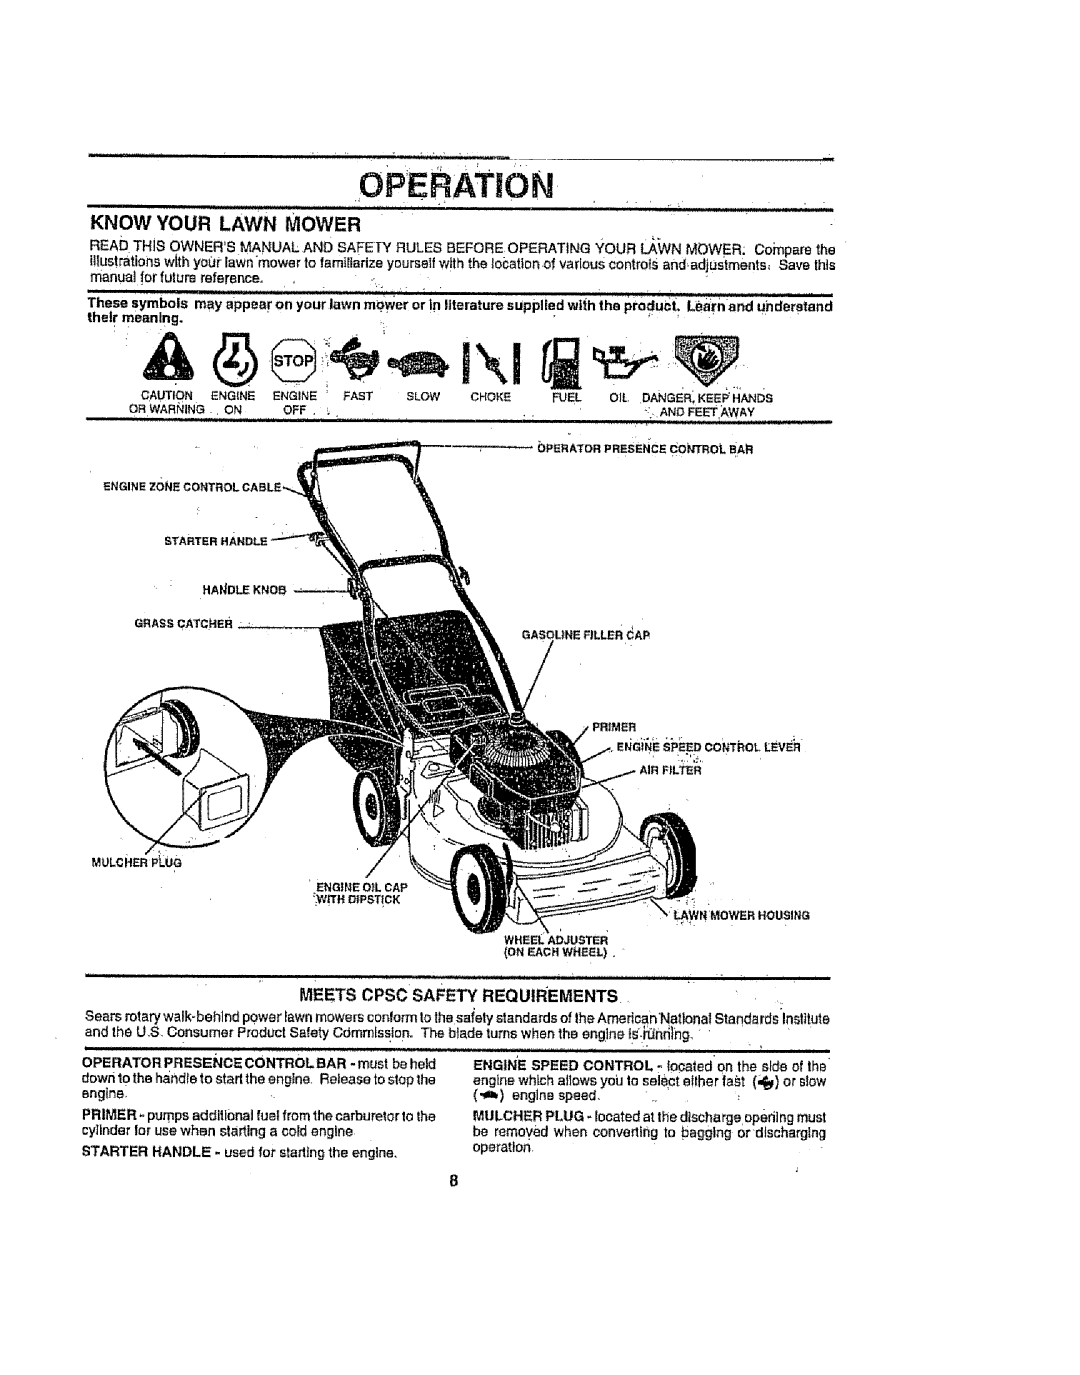 Sears 917386121 owner manual Operation, Know Your Lawn Mower, Meets Cpsc Safety Requirements 